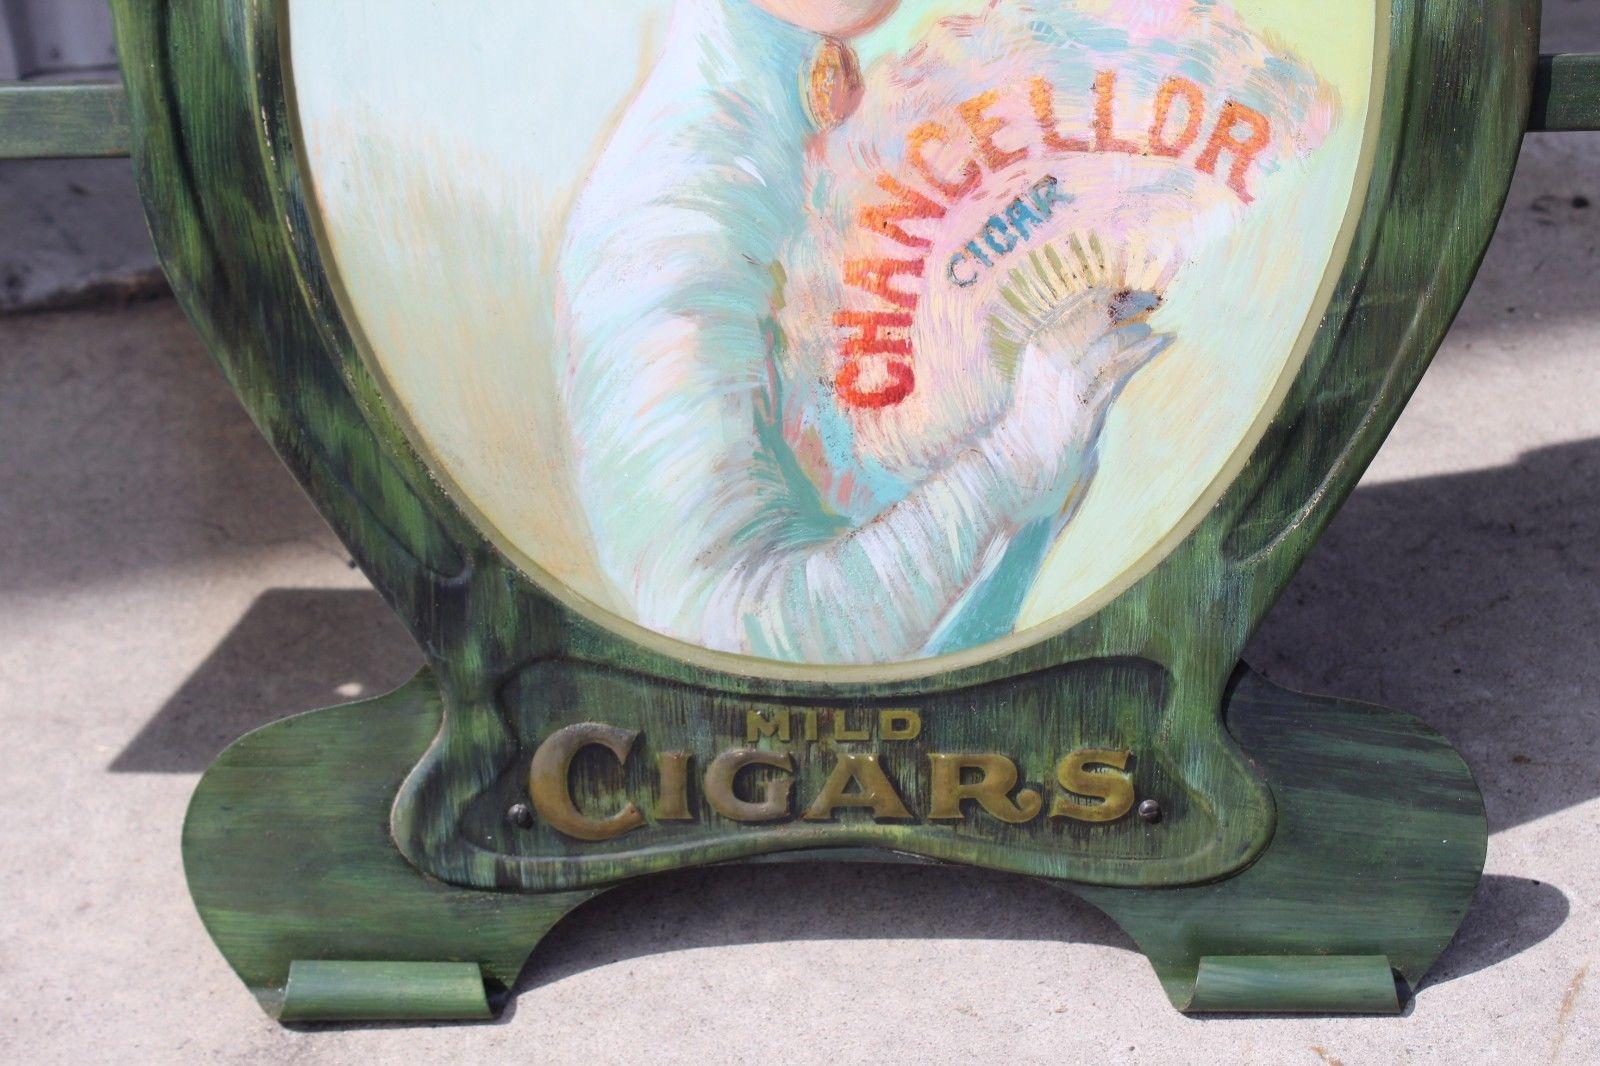 1900s-1920s Chancellor Cigars Tin Display Store Advertising For Sale 3